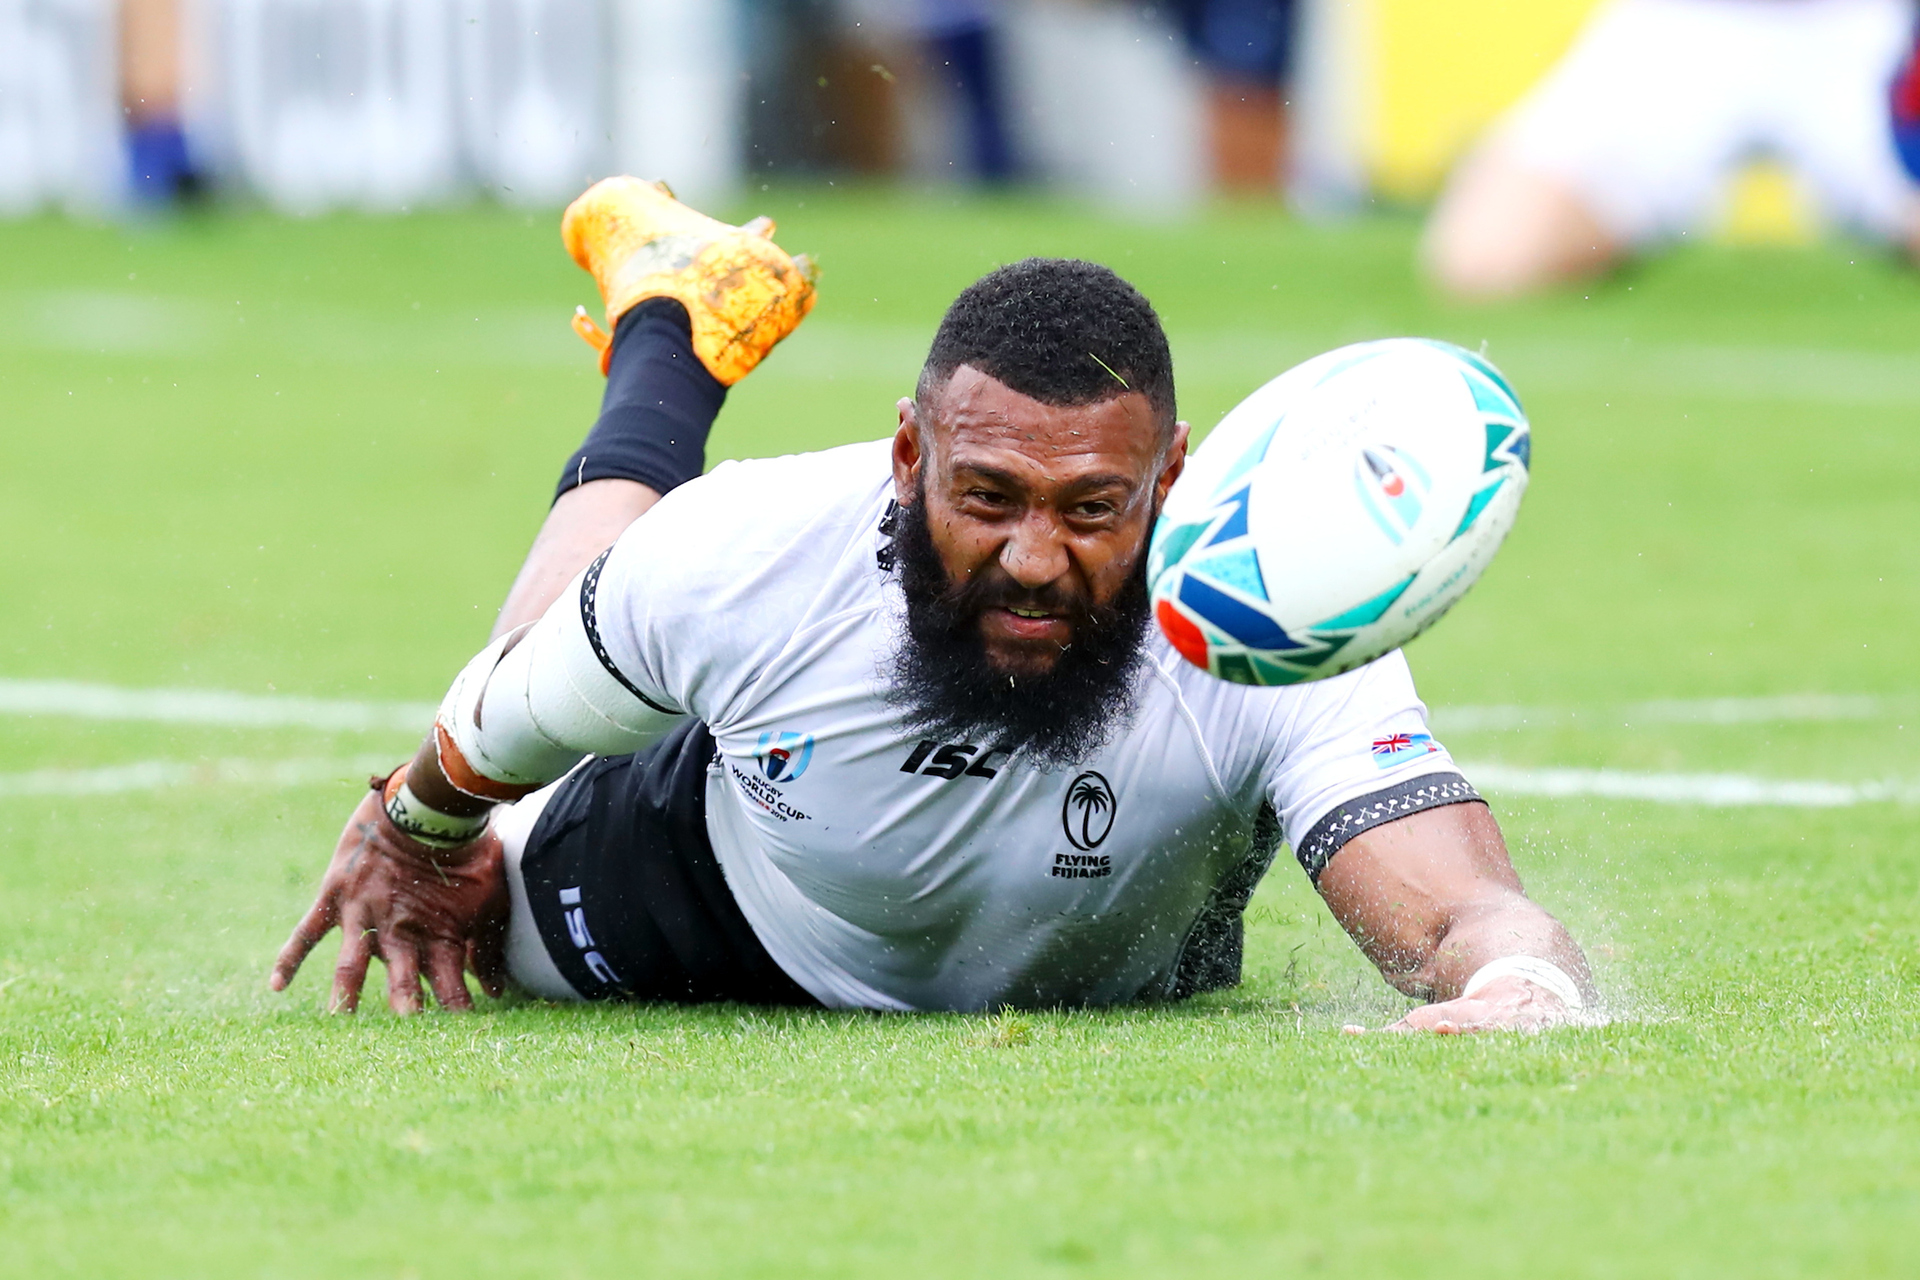 Rugby World Cup 2019 Wales v Fiji - How to watch, live streaming, kick-off time, starting lineups